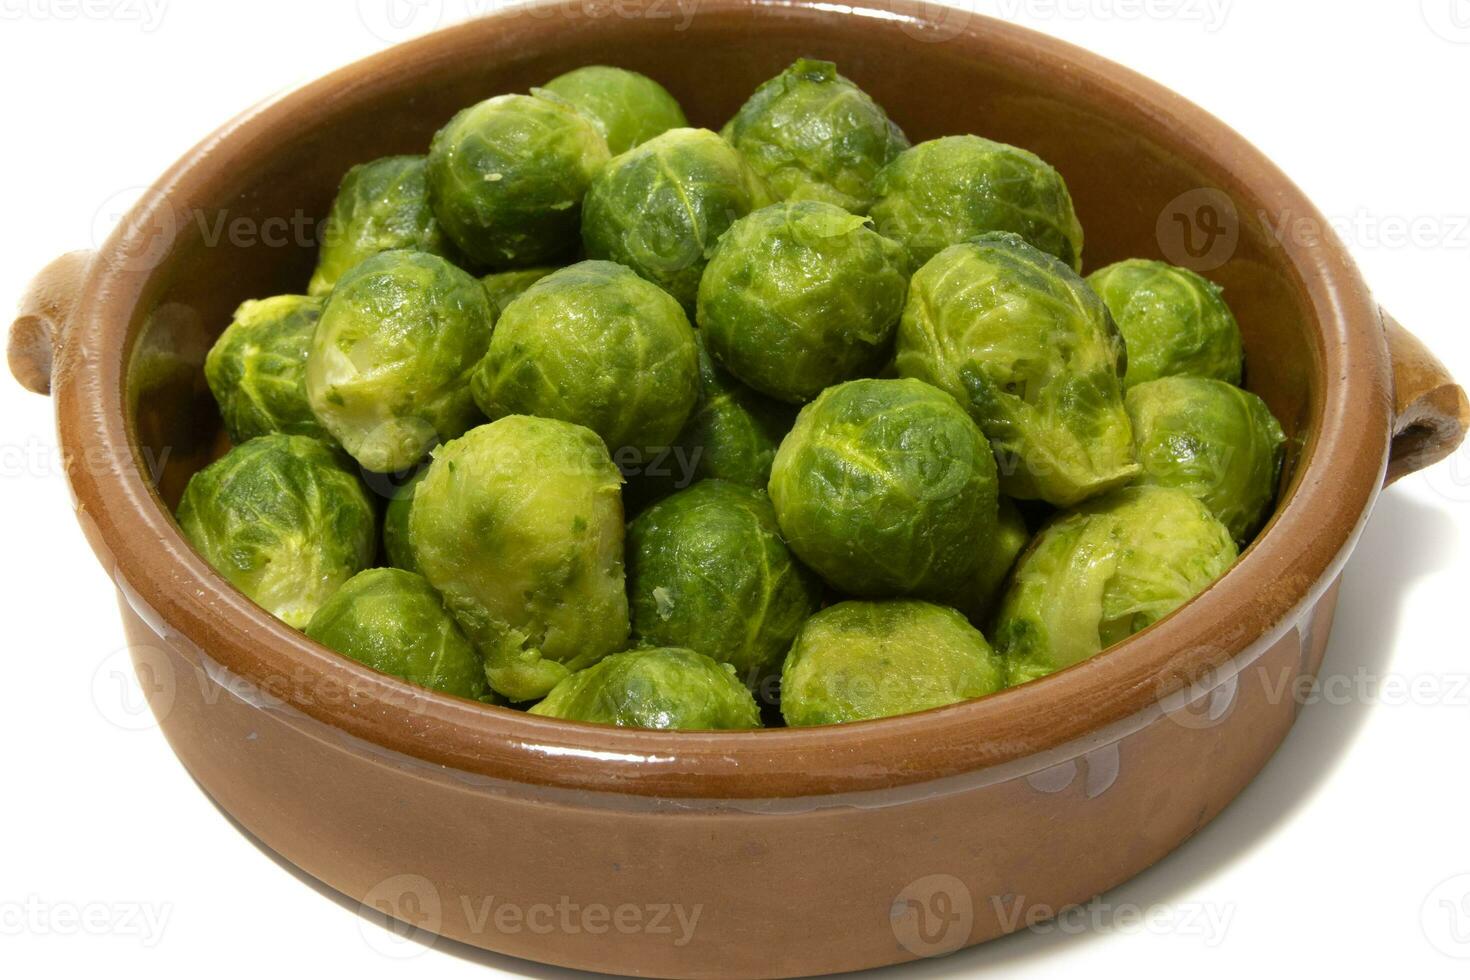 A pile of boiled brussels sprouts, served in a clay bowl. Isolated on a white background. Healthy food concept. photo